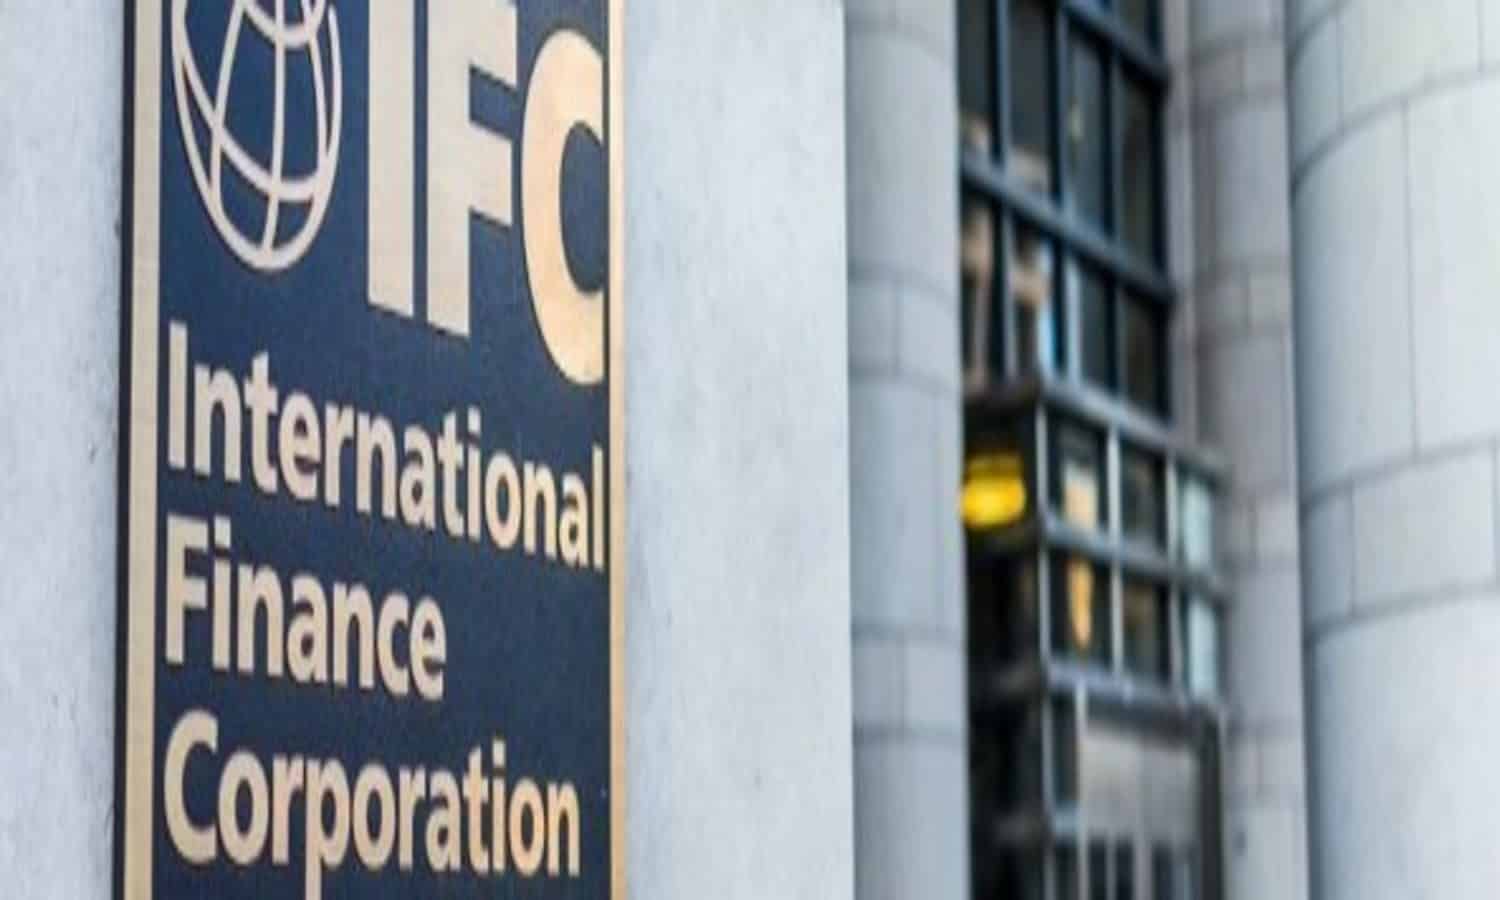 Banque Misr to secure $260M loan from IFC for MSMEs